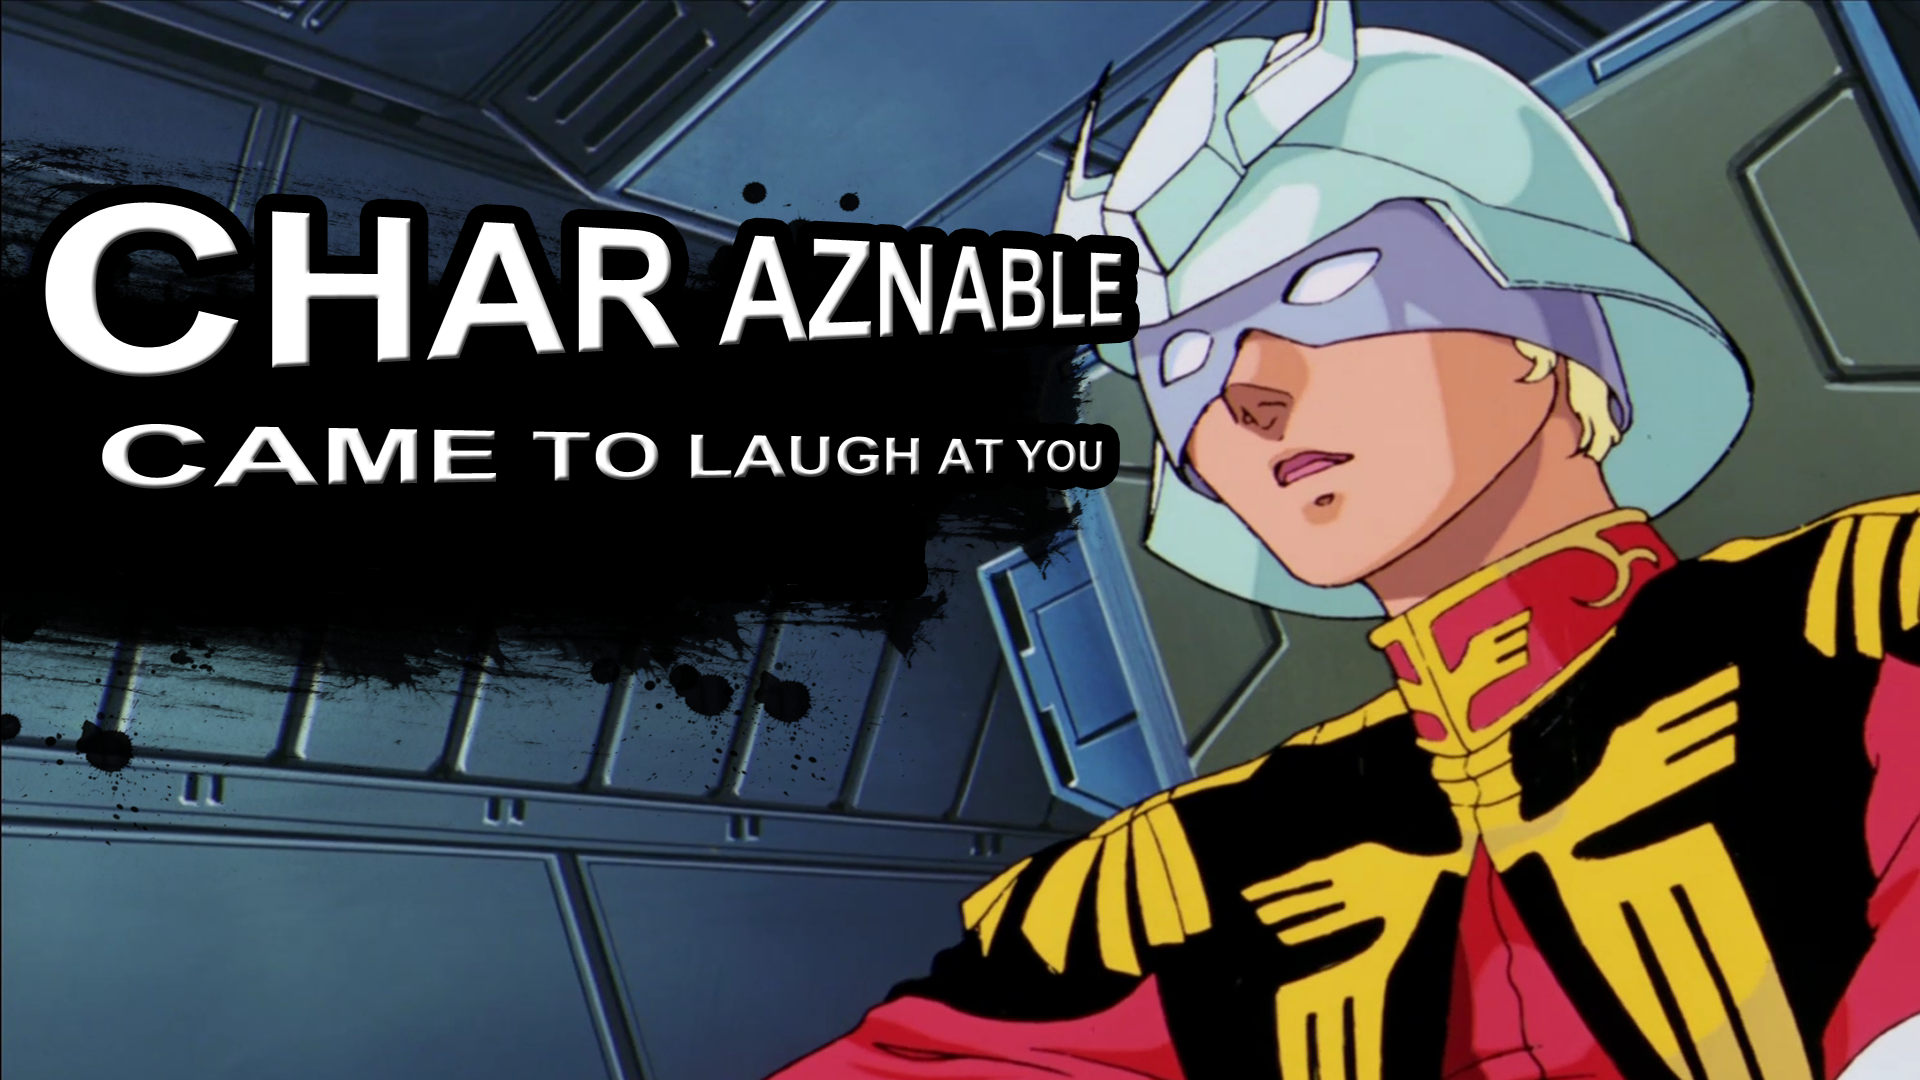 Char Aznable came to laugh at you.png.